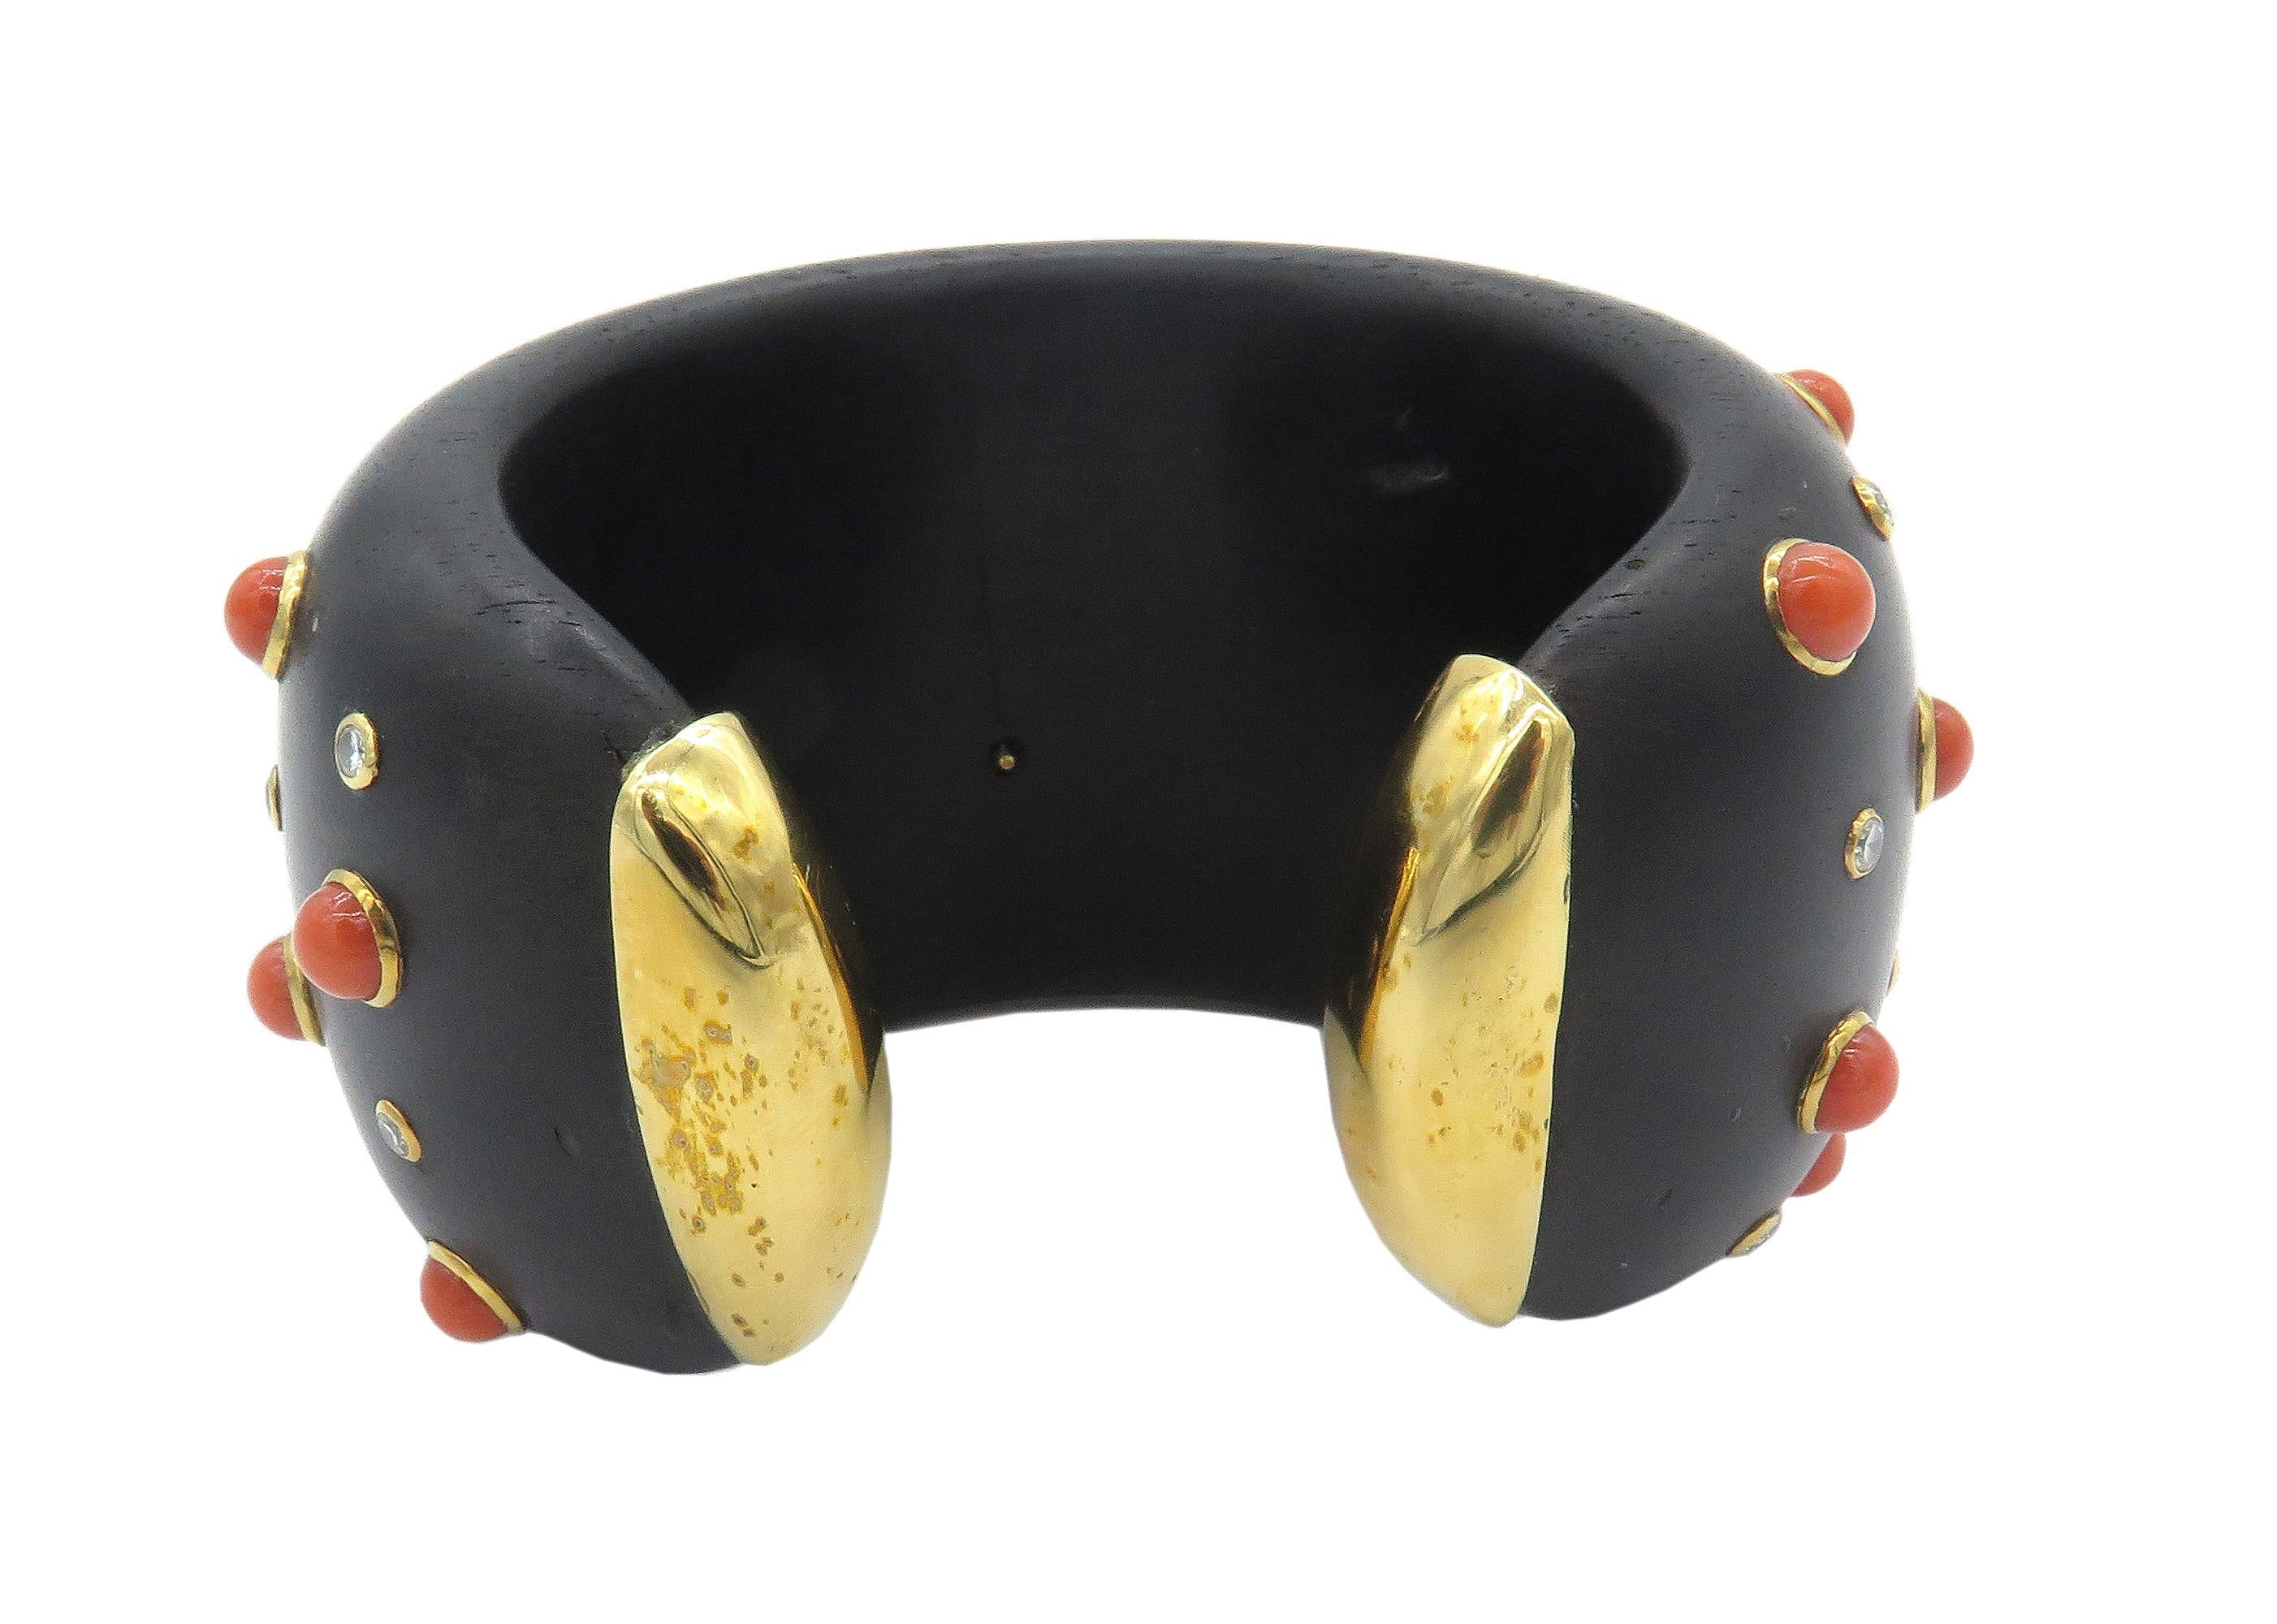 Ebony wood cuff bracelet set with cabochon corals and 18k gold bezels and a beautiful carved 